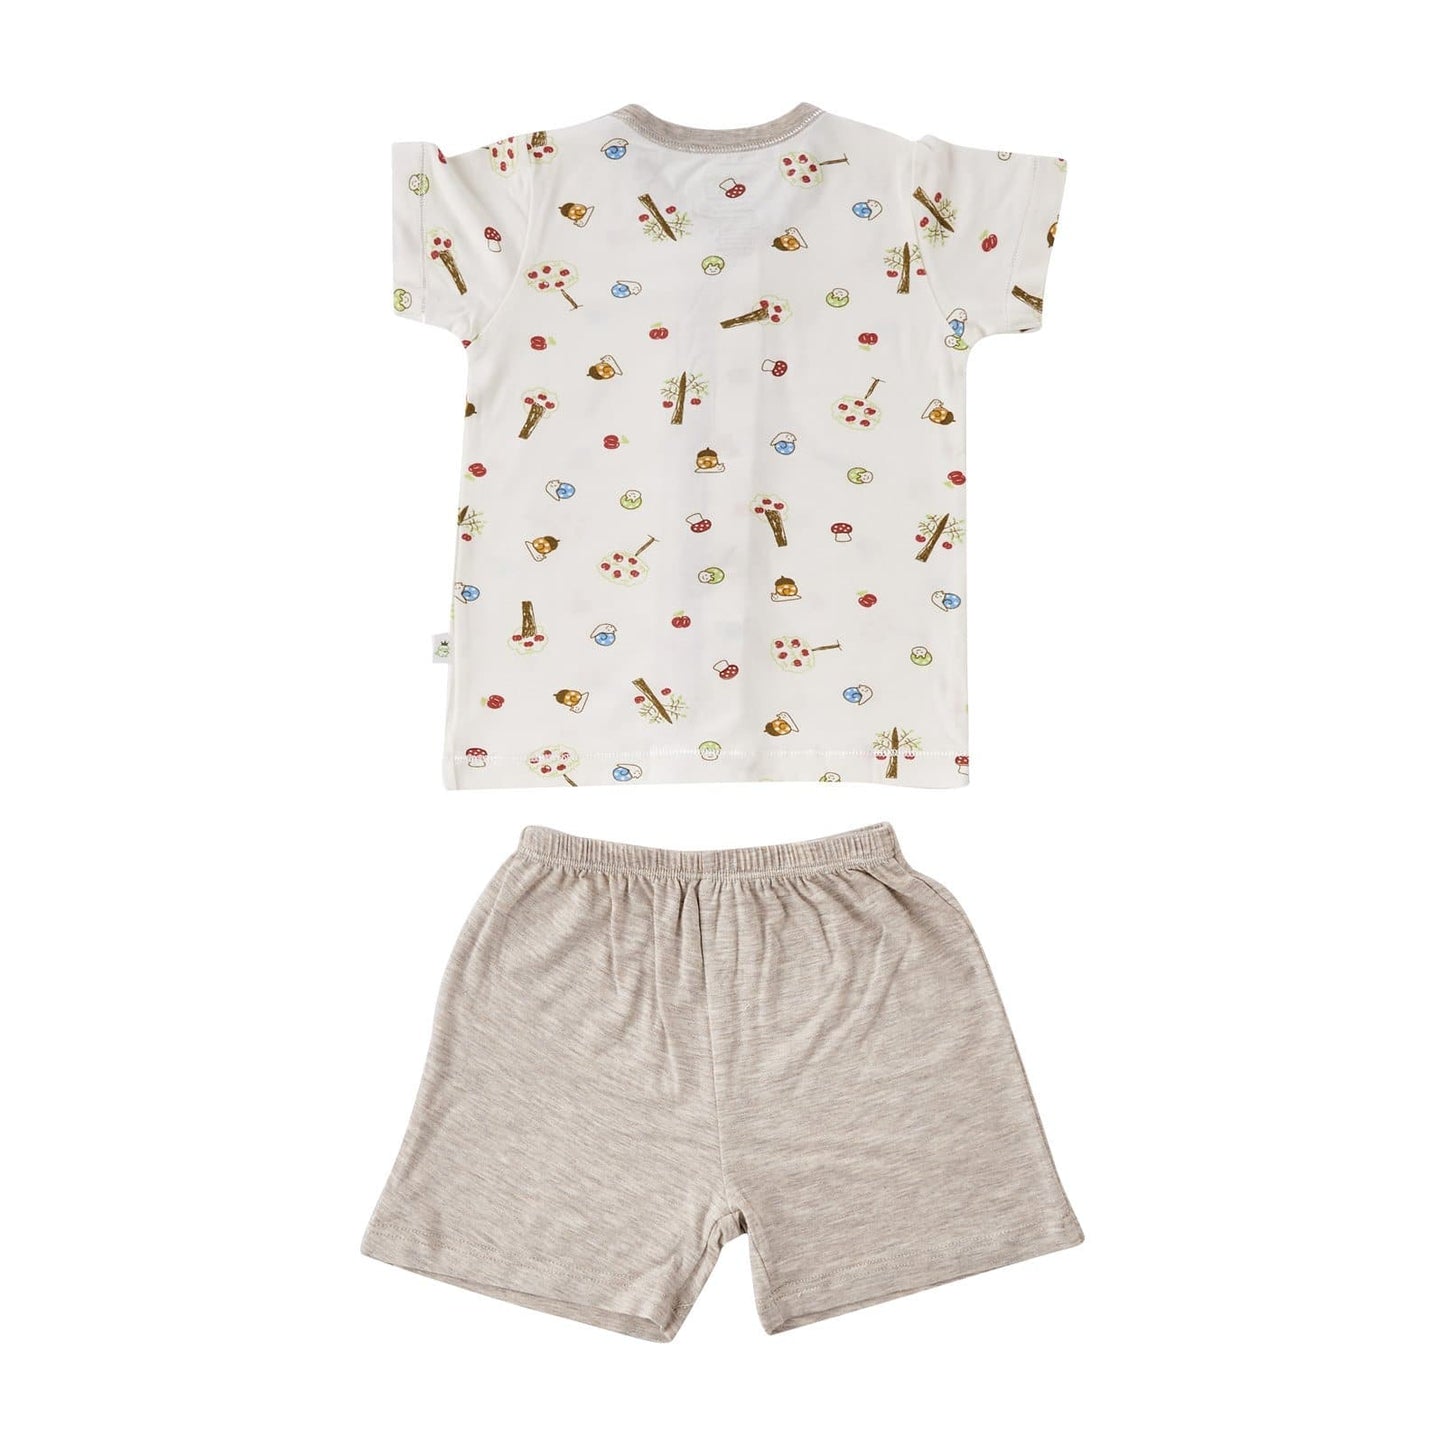 Apples - Short sleeved button vest with shorts (Khaki) - Simply Life